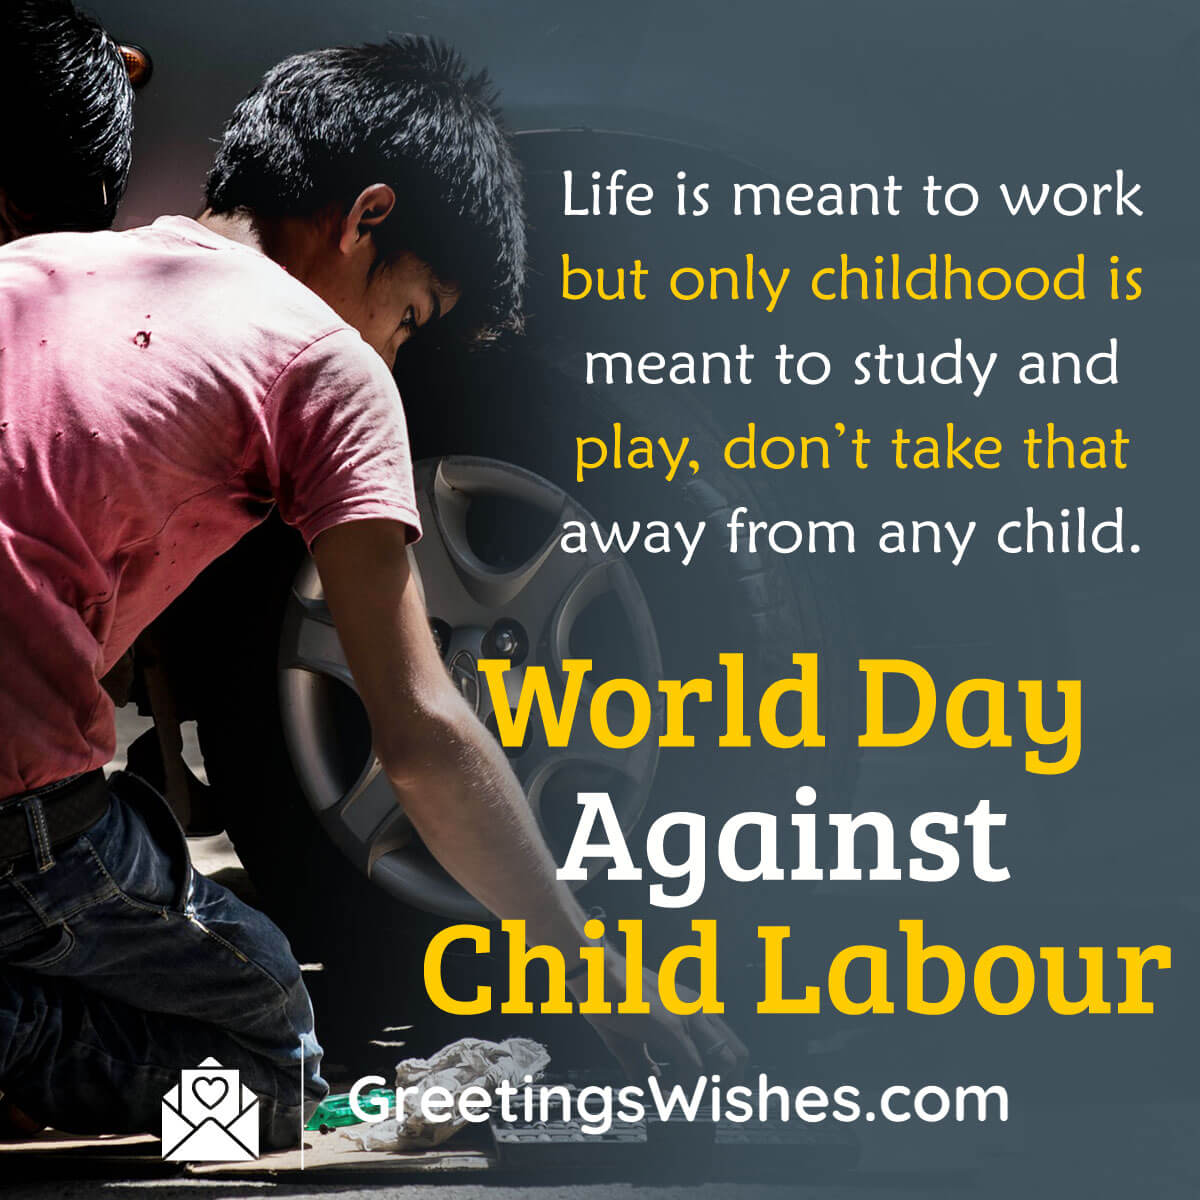 Child Labour Day Poster